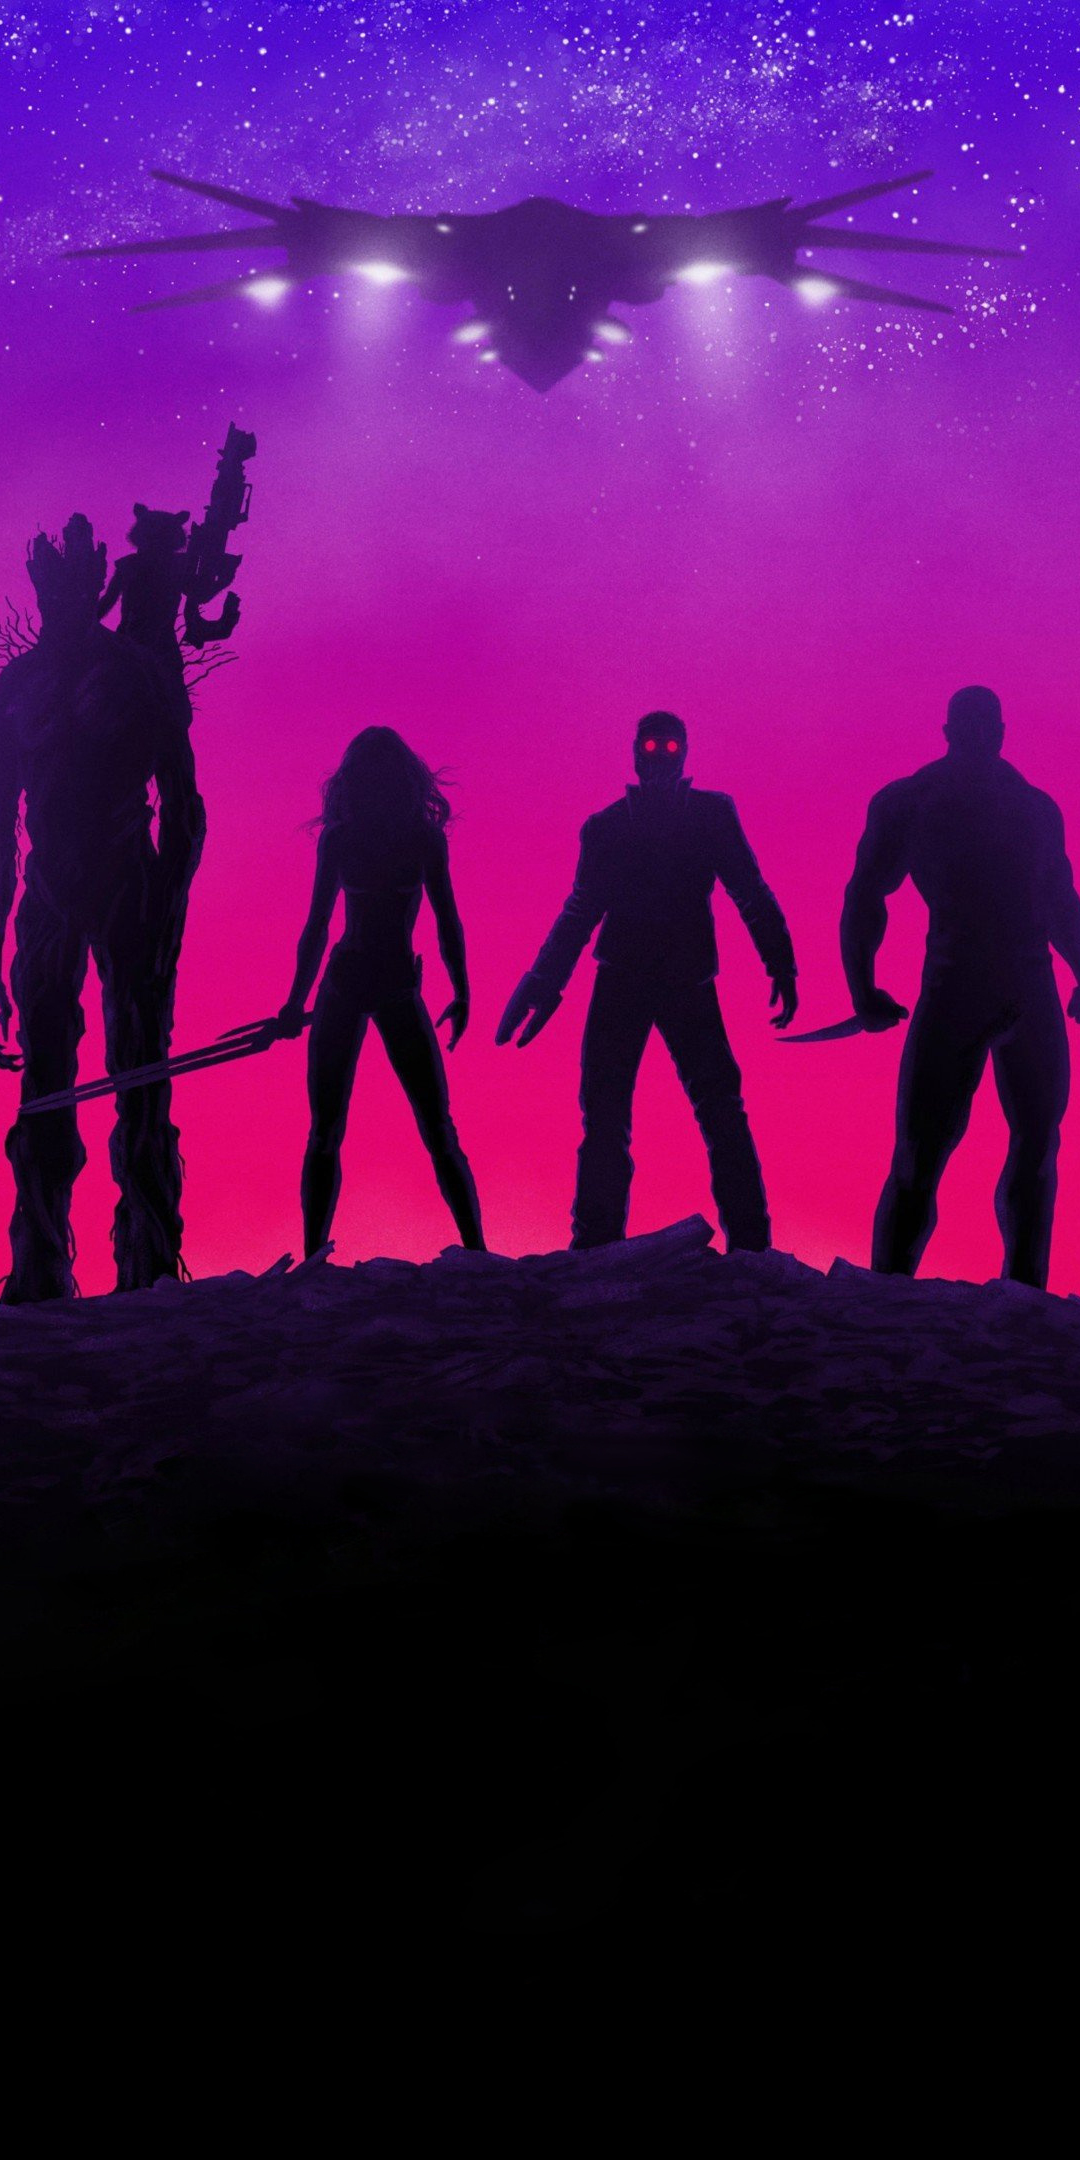 Guardians of the Galaxy, movie, neon lights, poster, 1080x2160 wallpaper